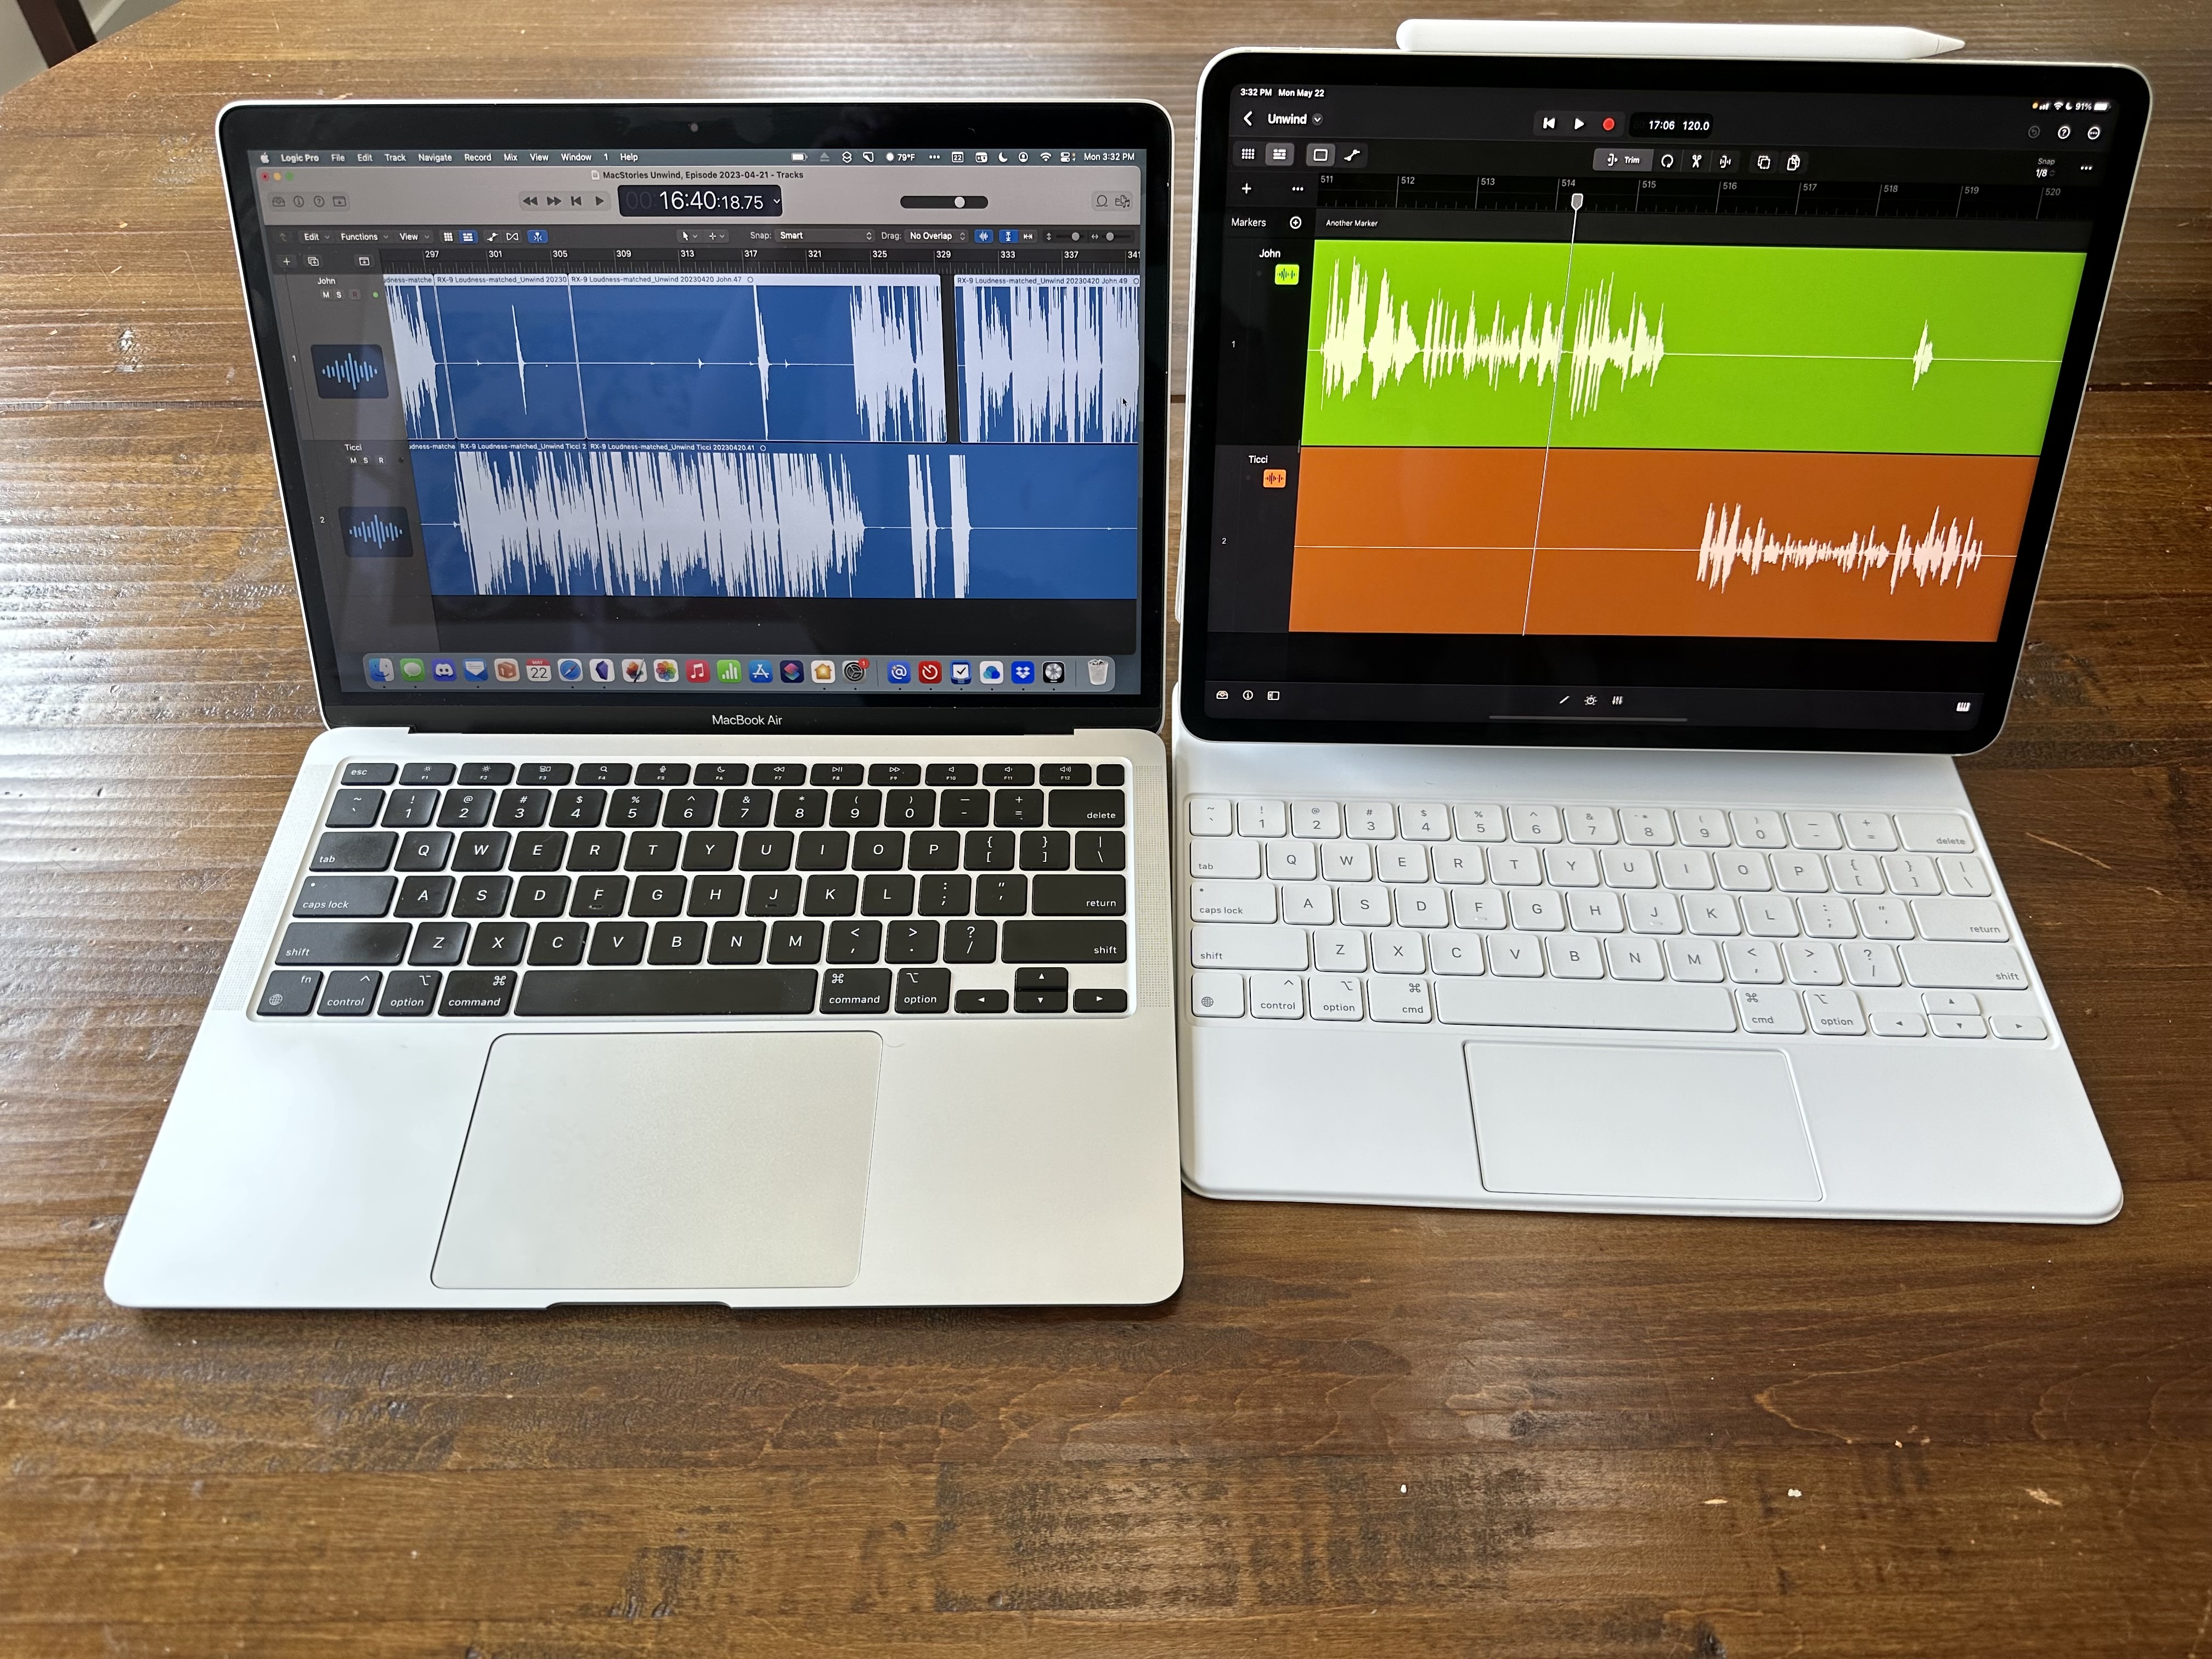 Logic Pro for the Mac looks old in contrast to the iPad version.